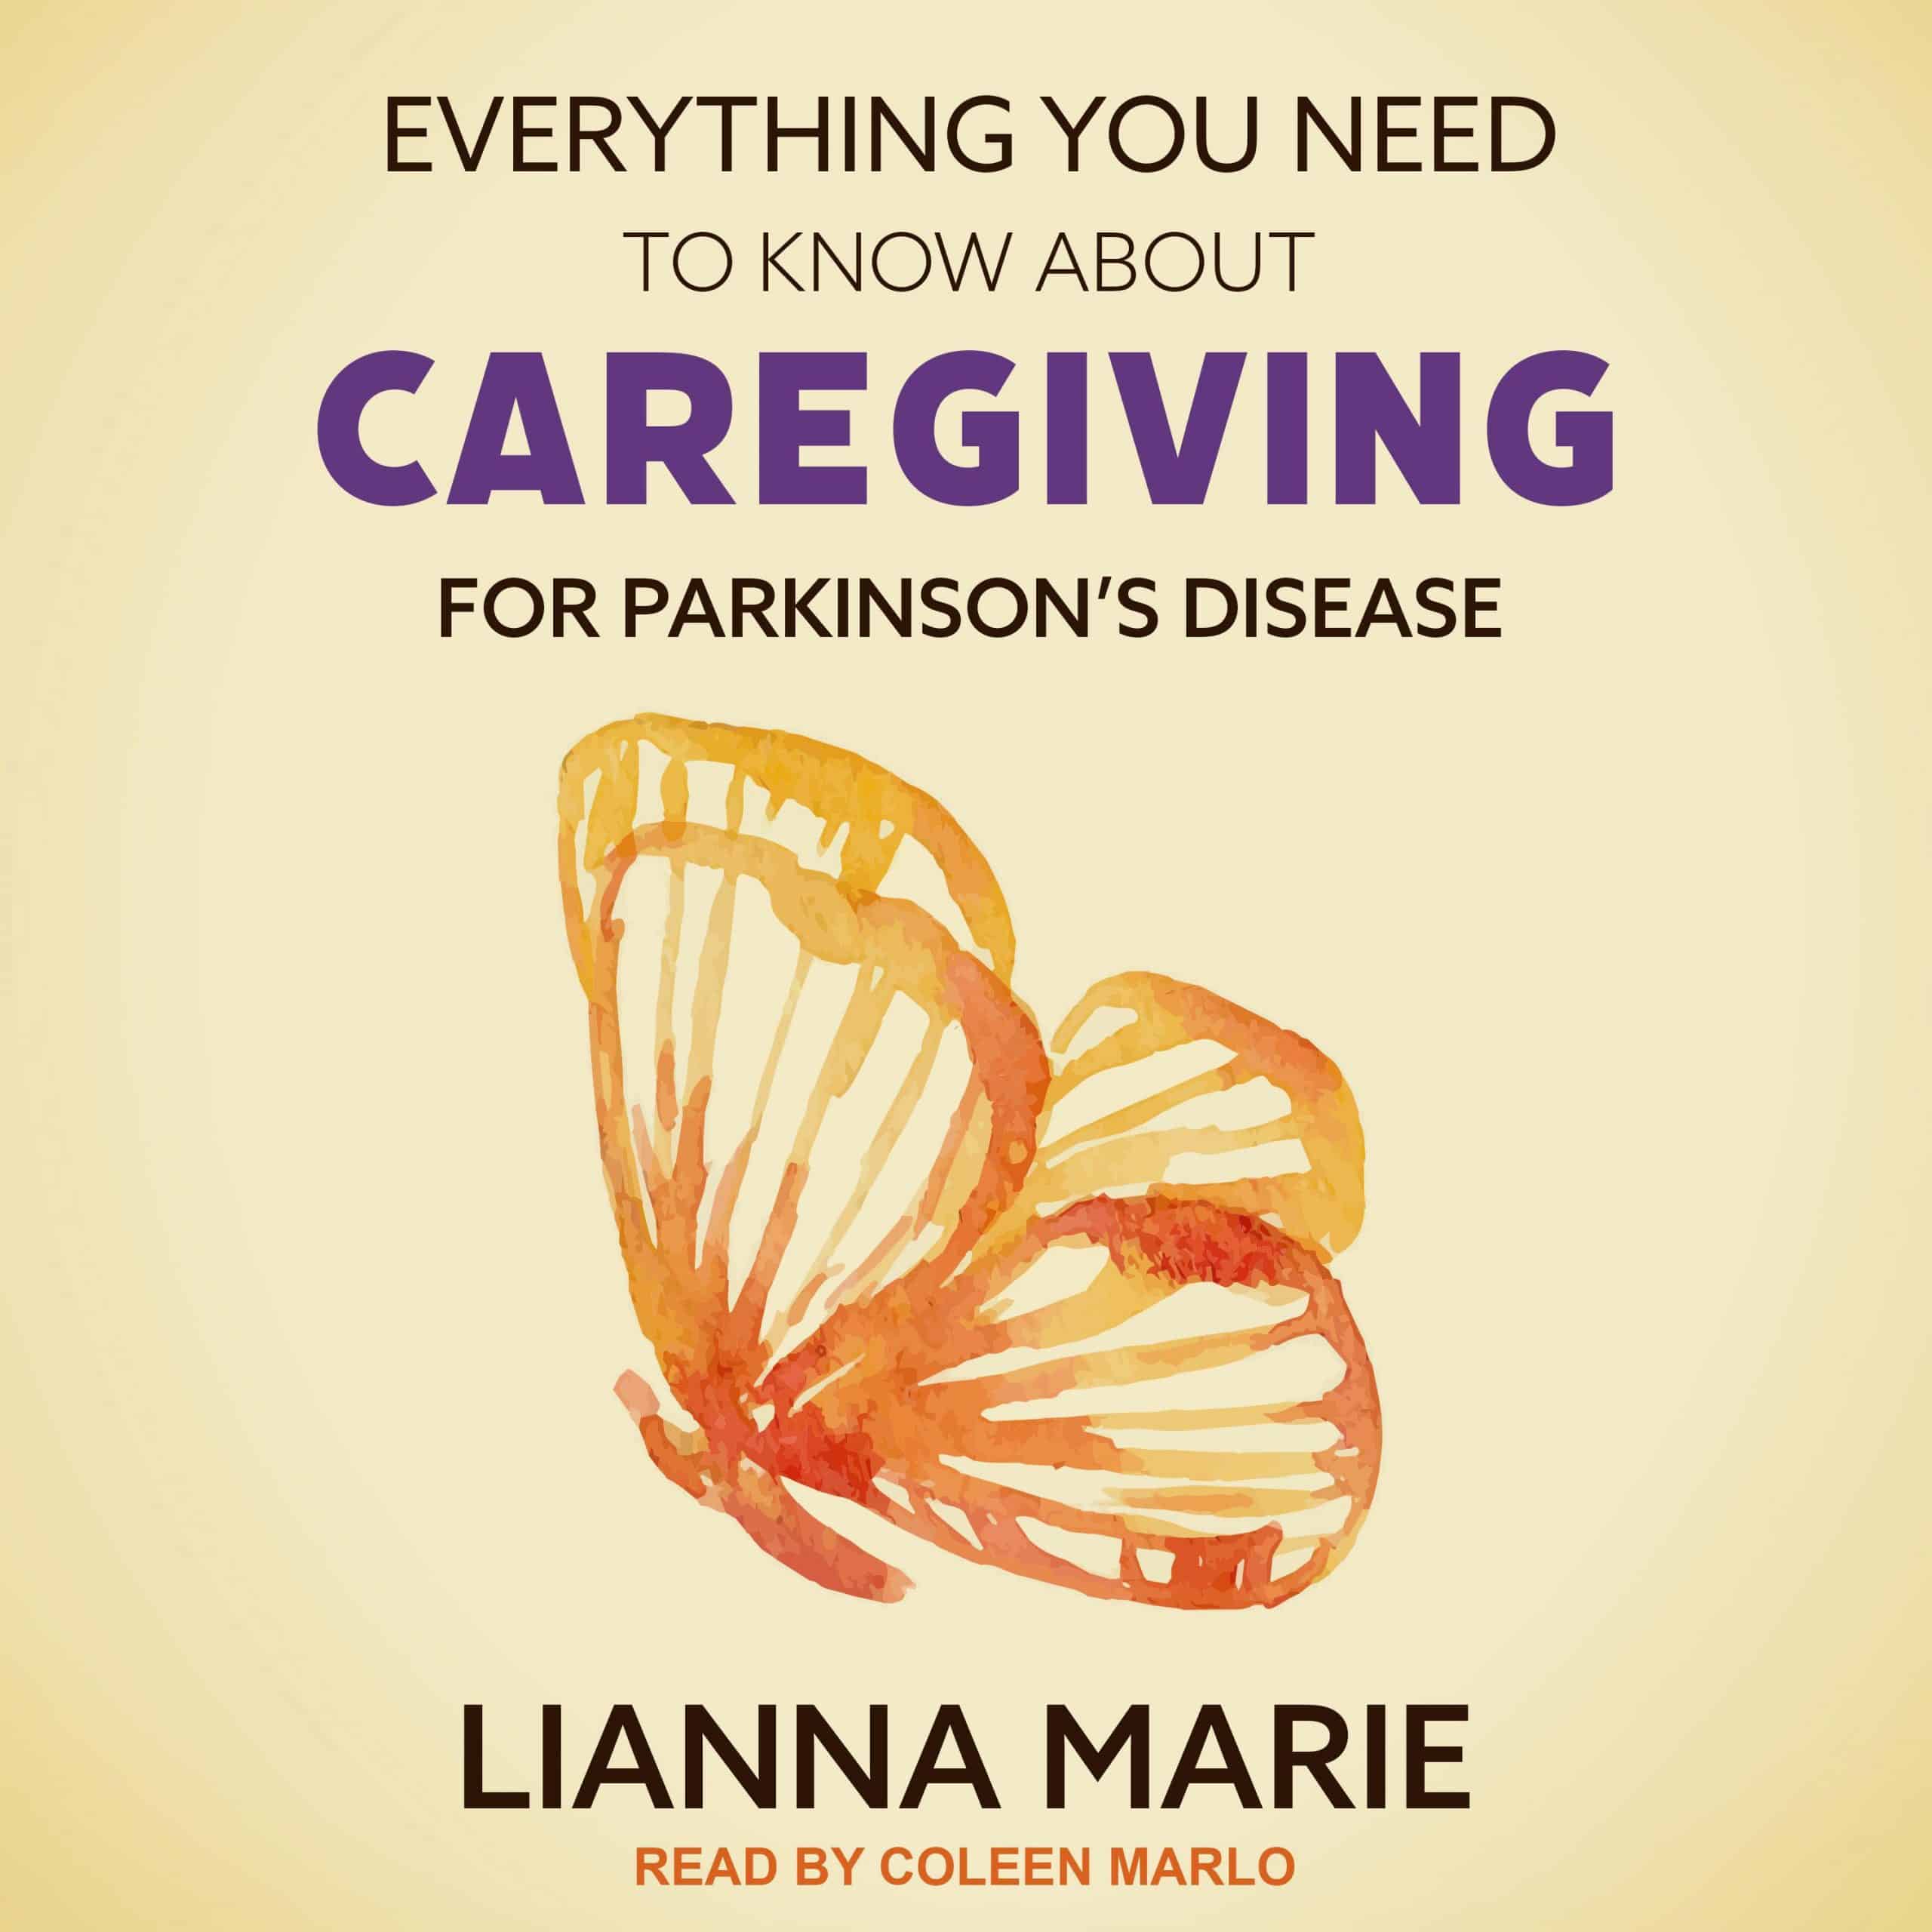 Everything You Need to Know About Caregiving for Parkinson